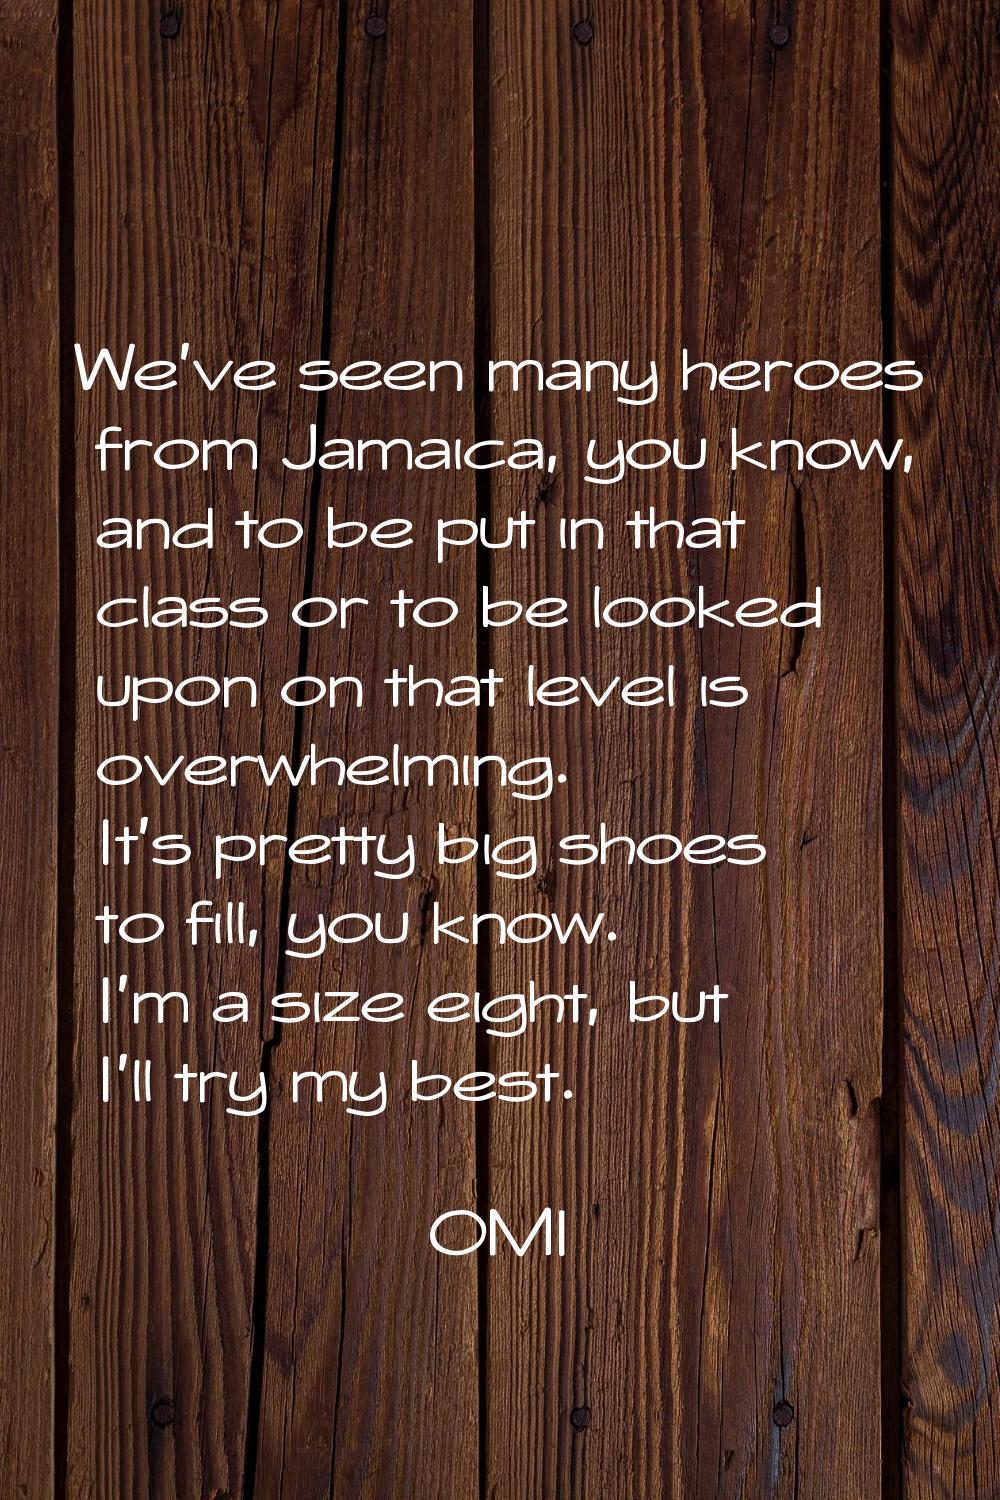 We've seen many heroes from Jamaica, you know, and to be put in that class or to be looked upon on 